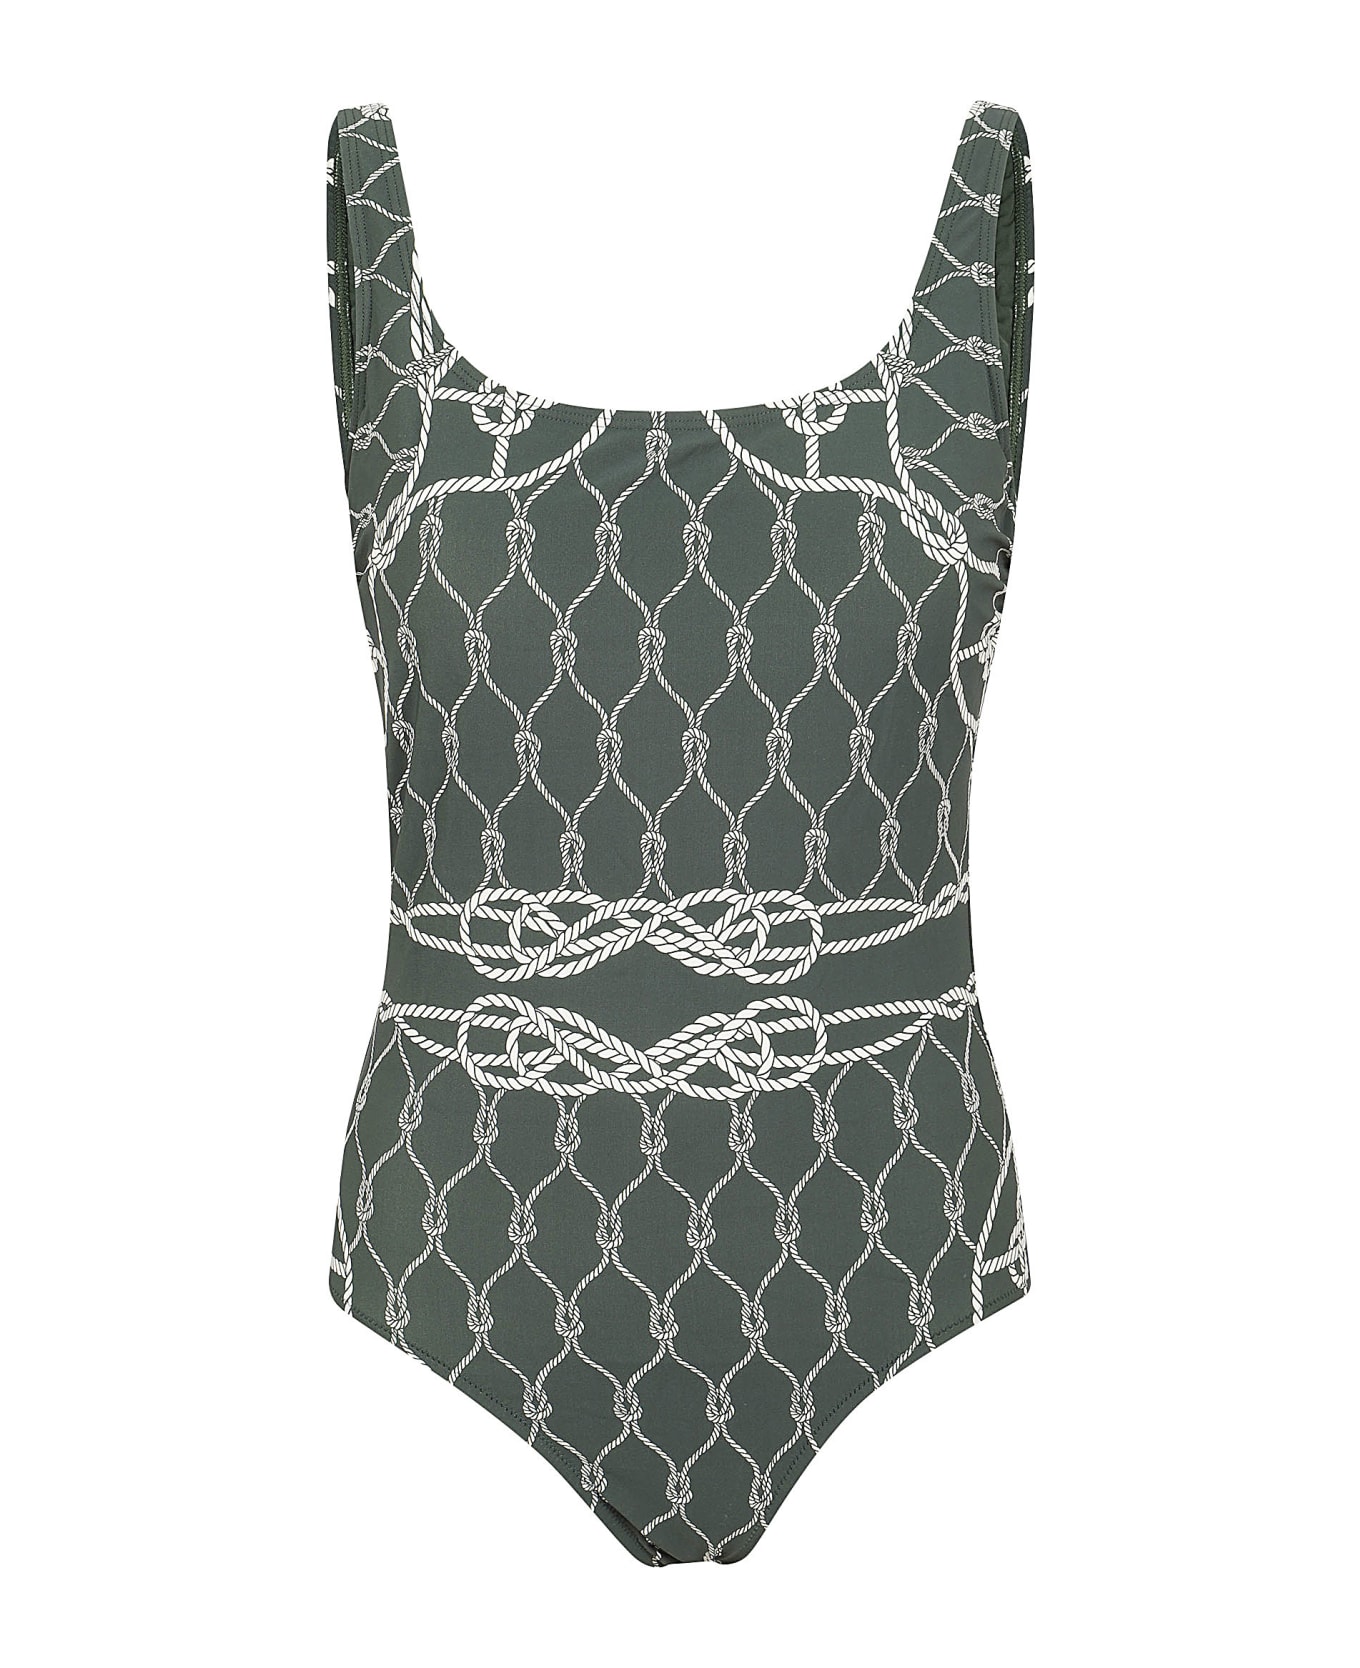 Tory Burch Printed Tank Suit - Ivory Knot ボディスーツ